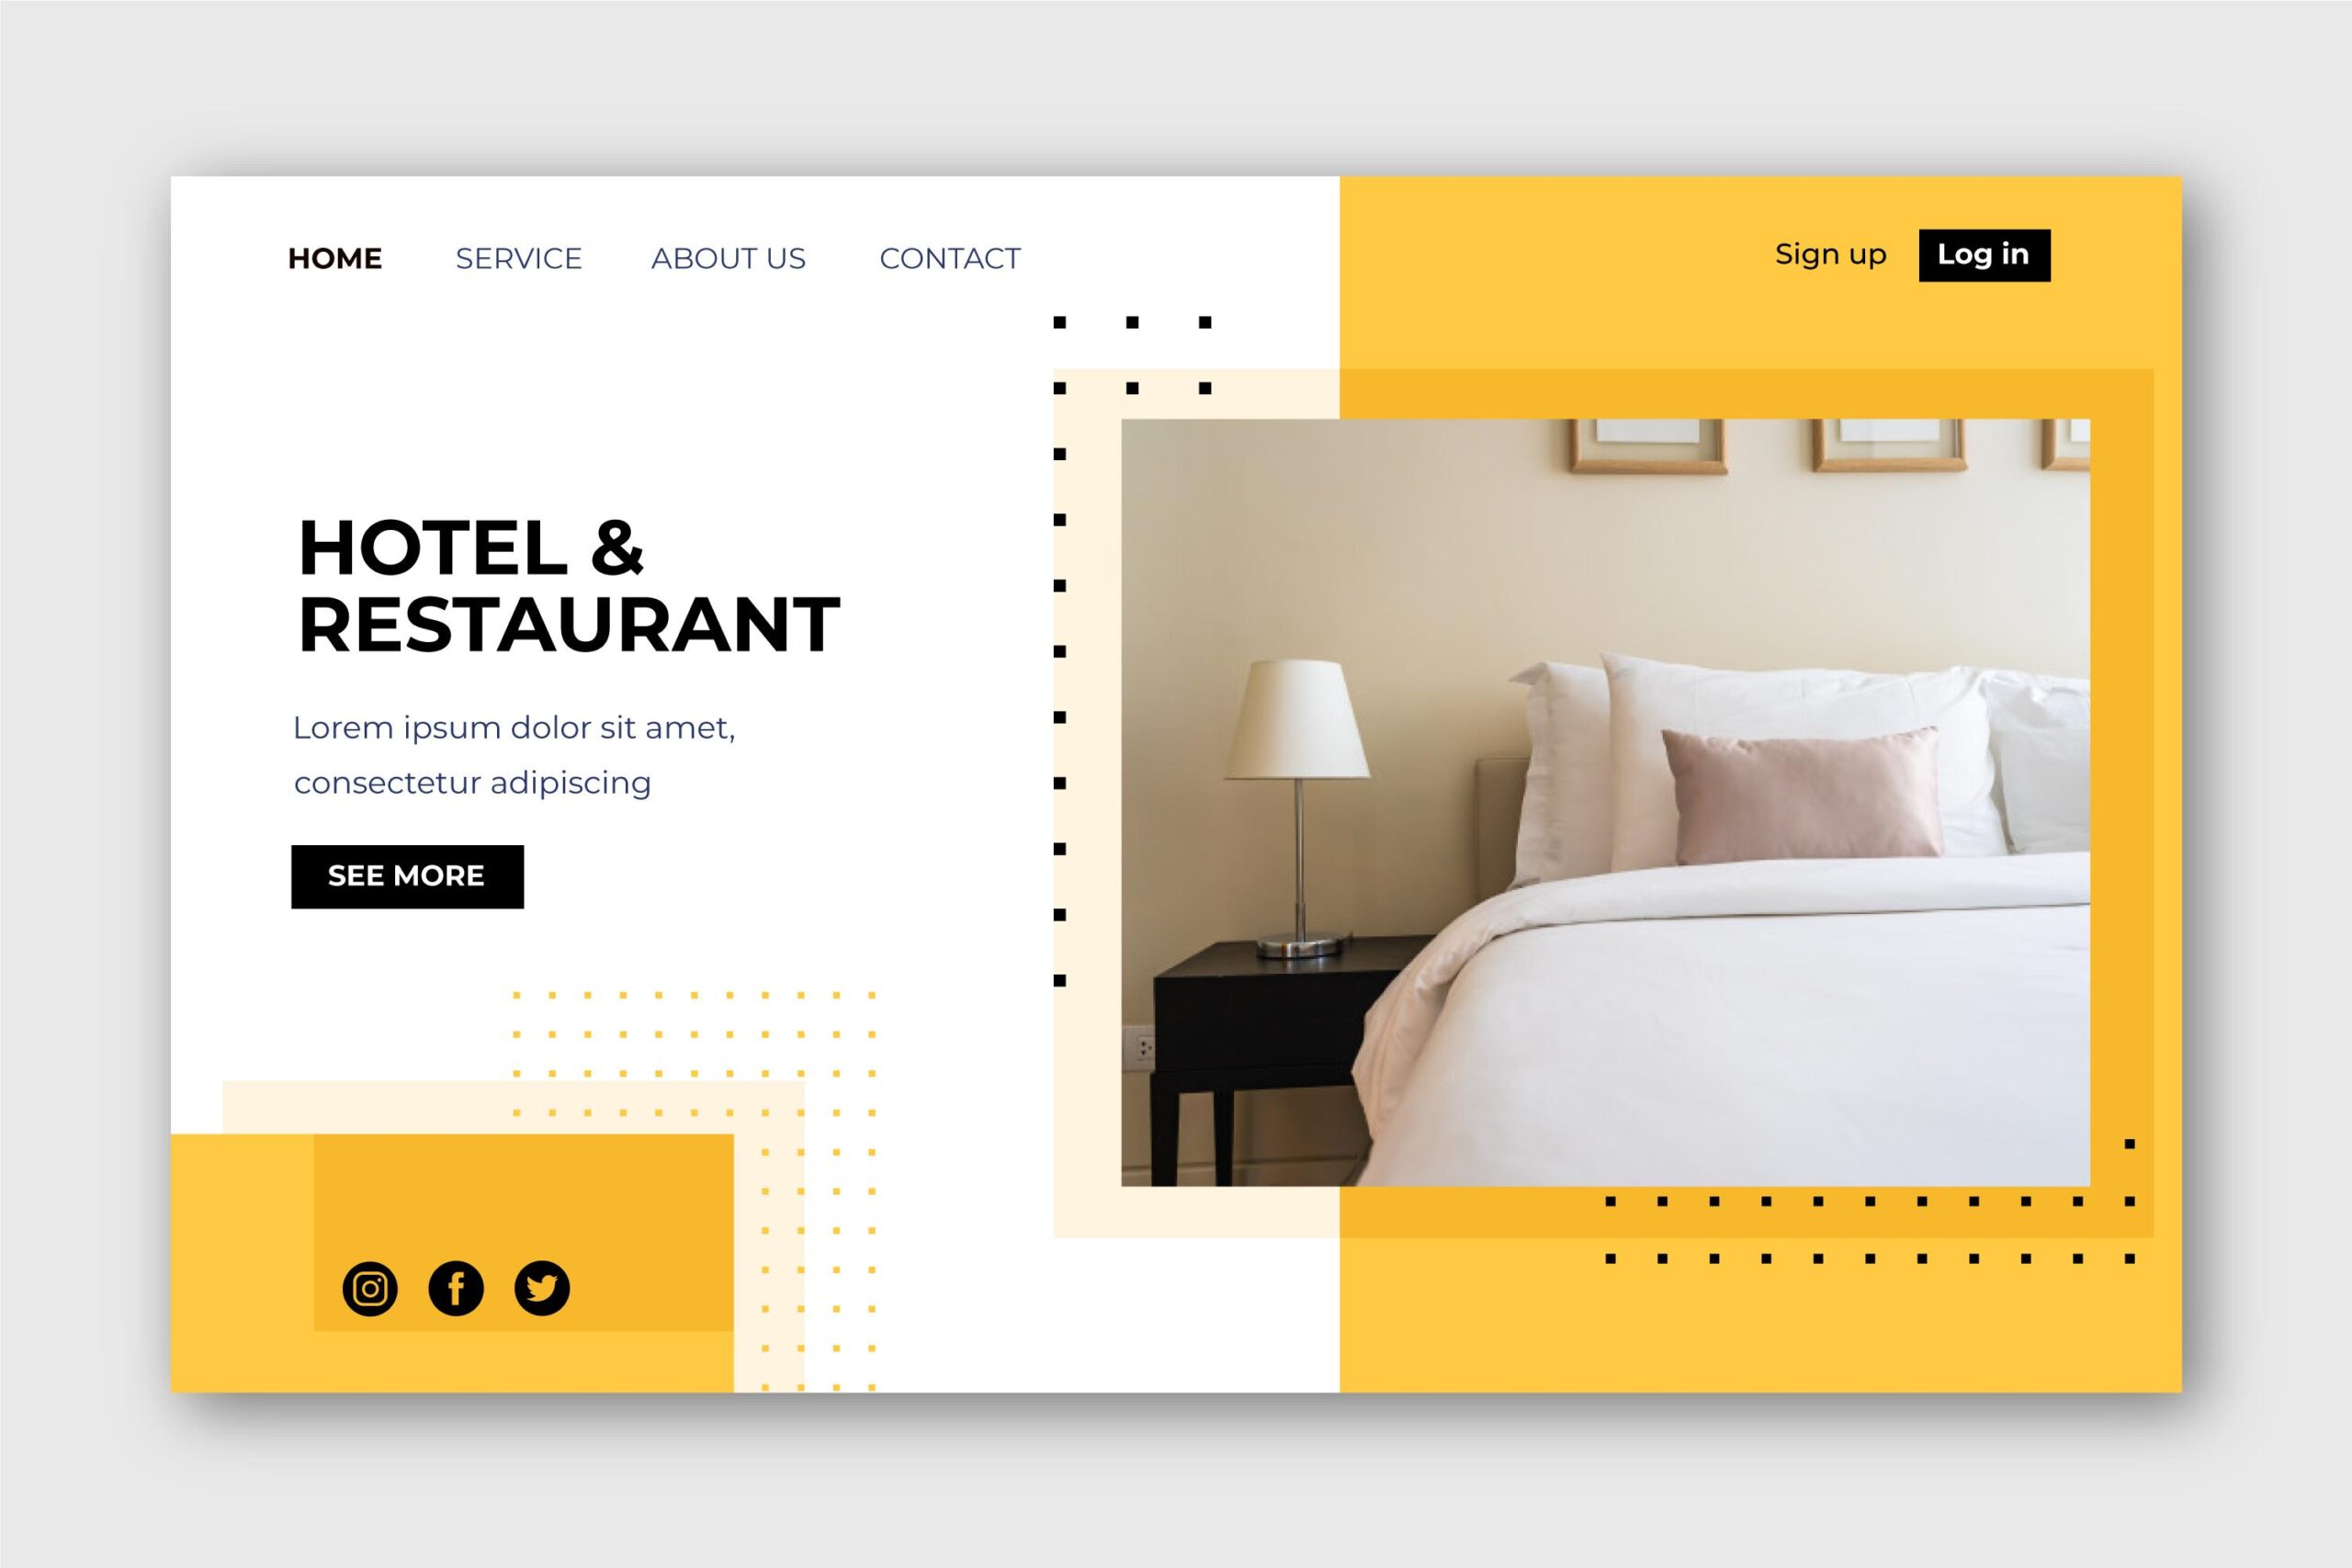 How to Build a Hotel Booking Website with Elementor for free.